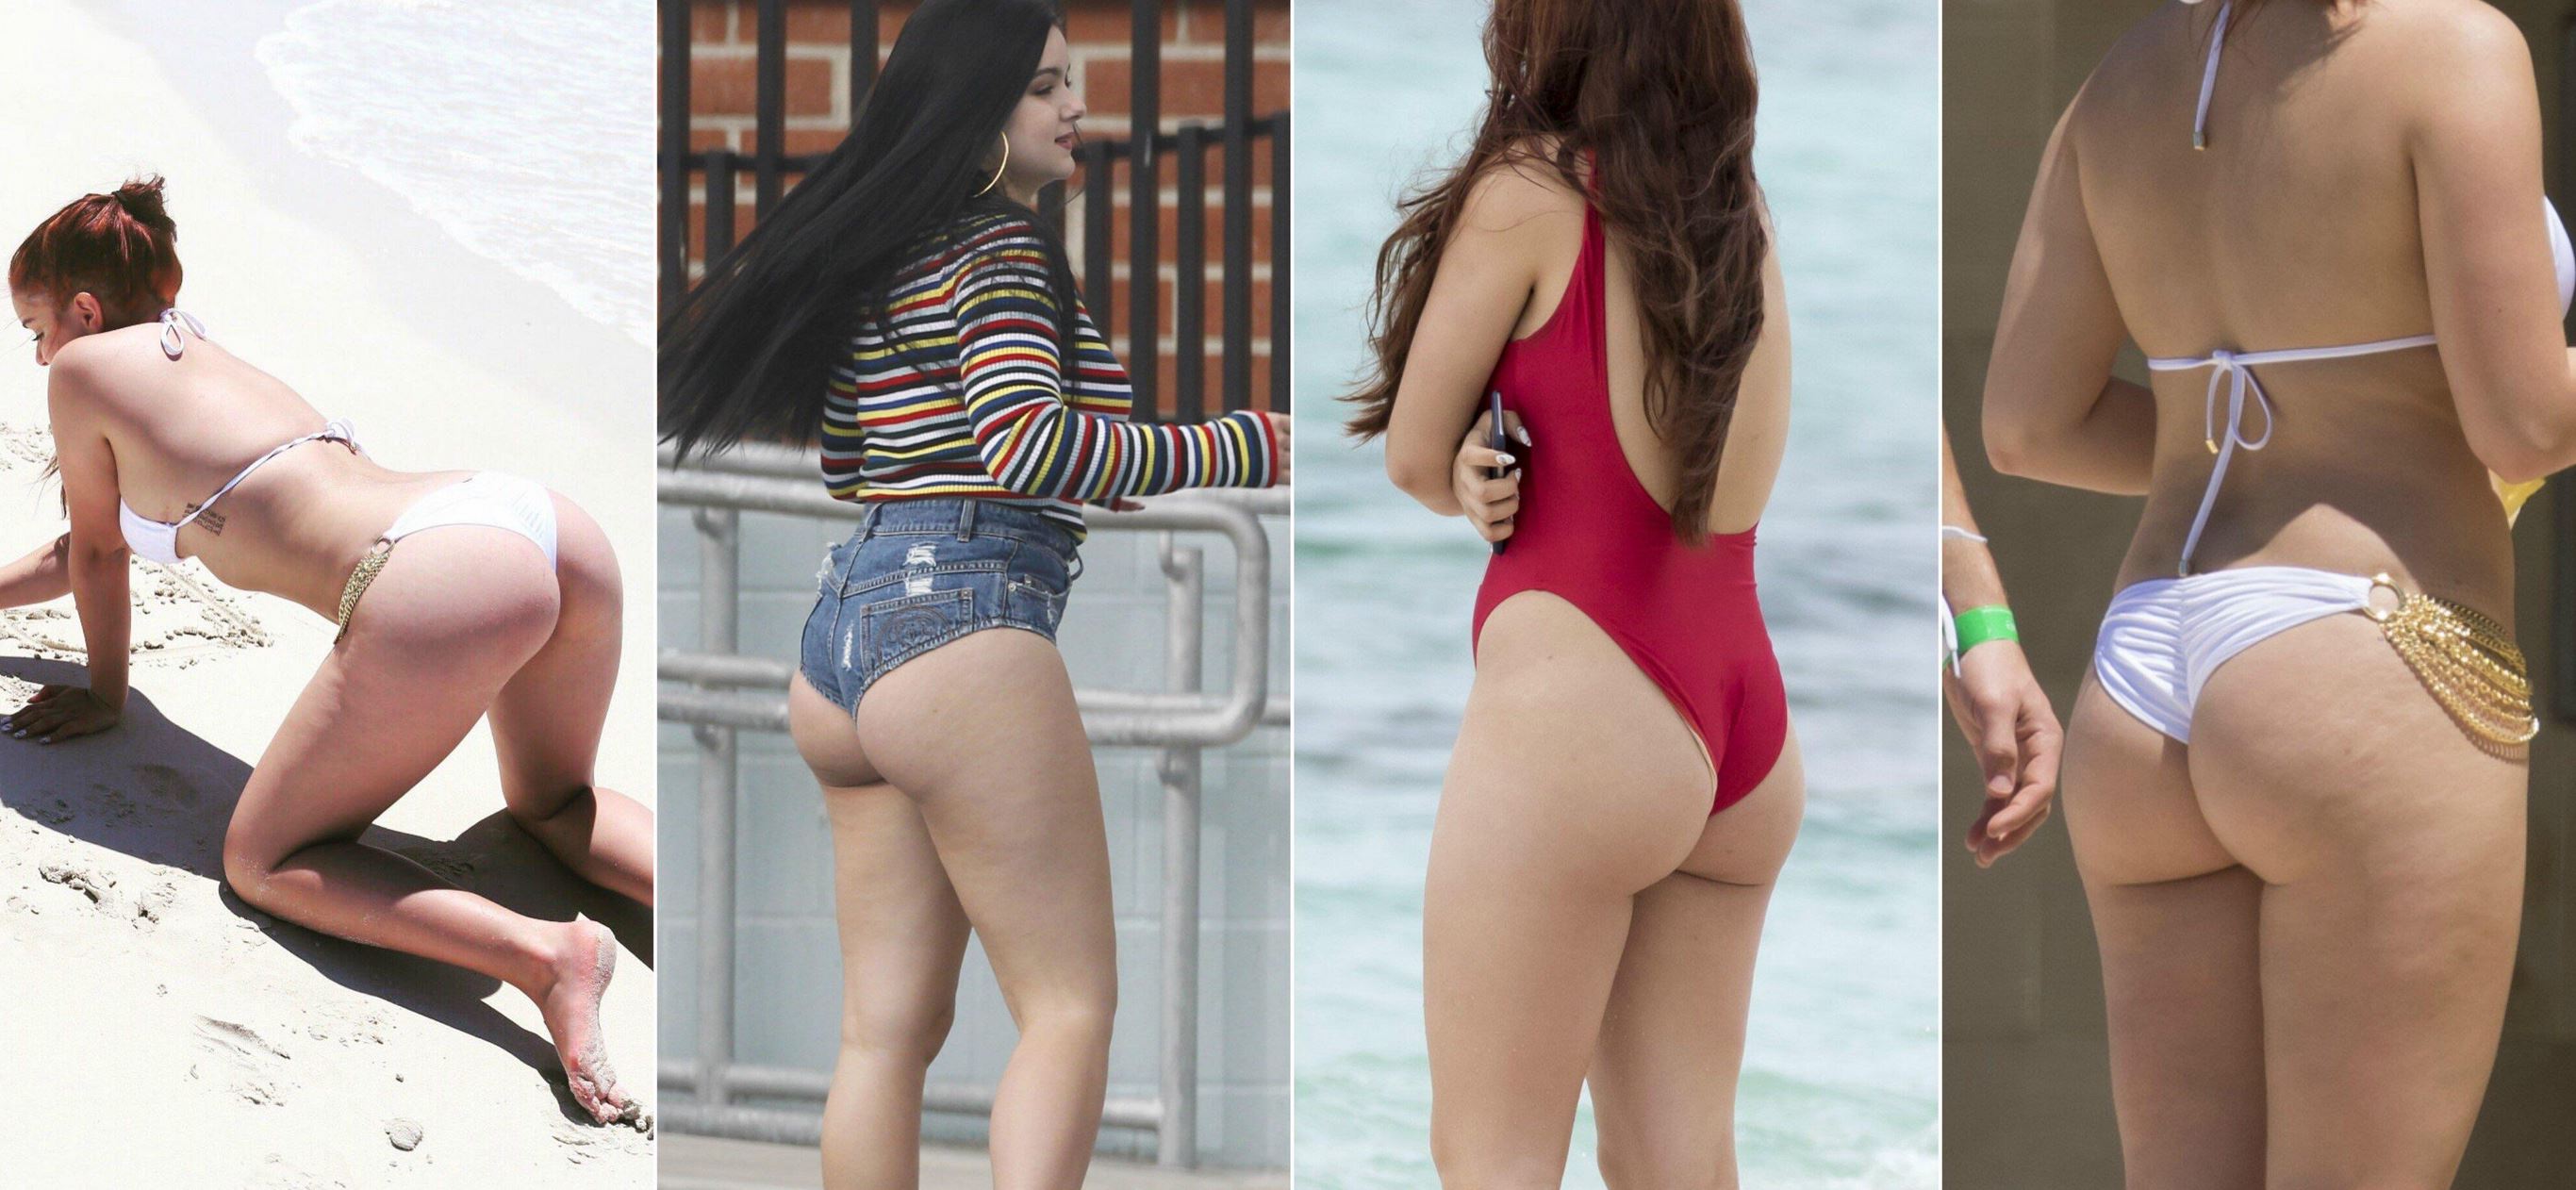 Ariel Winter Ass Is The Best Ever - Barnorama